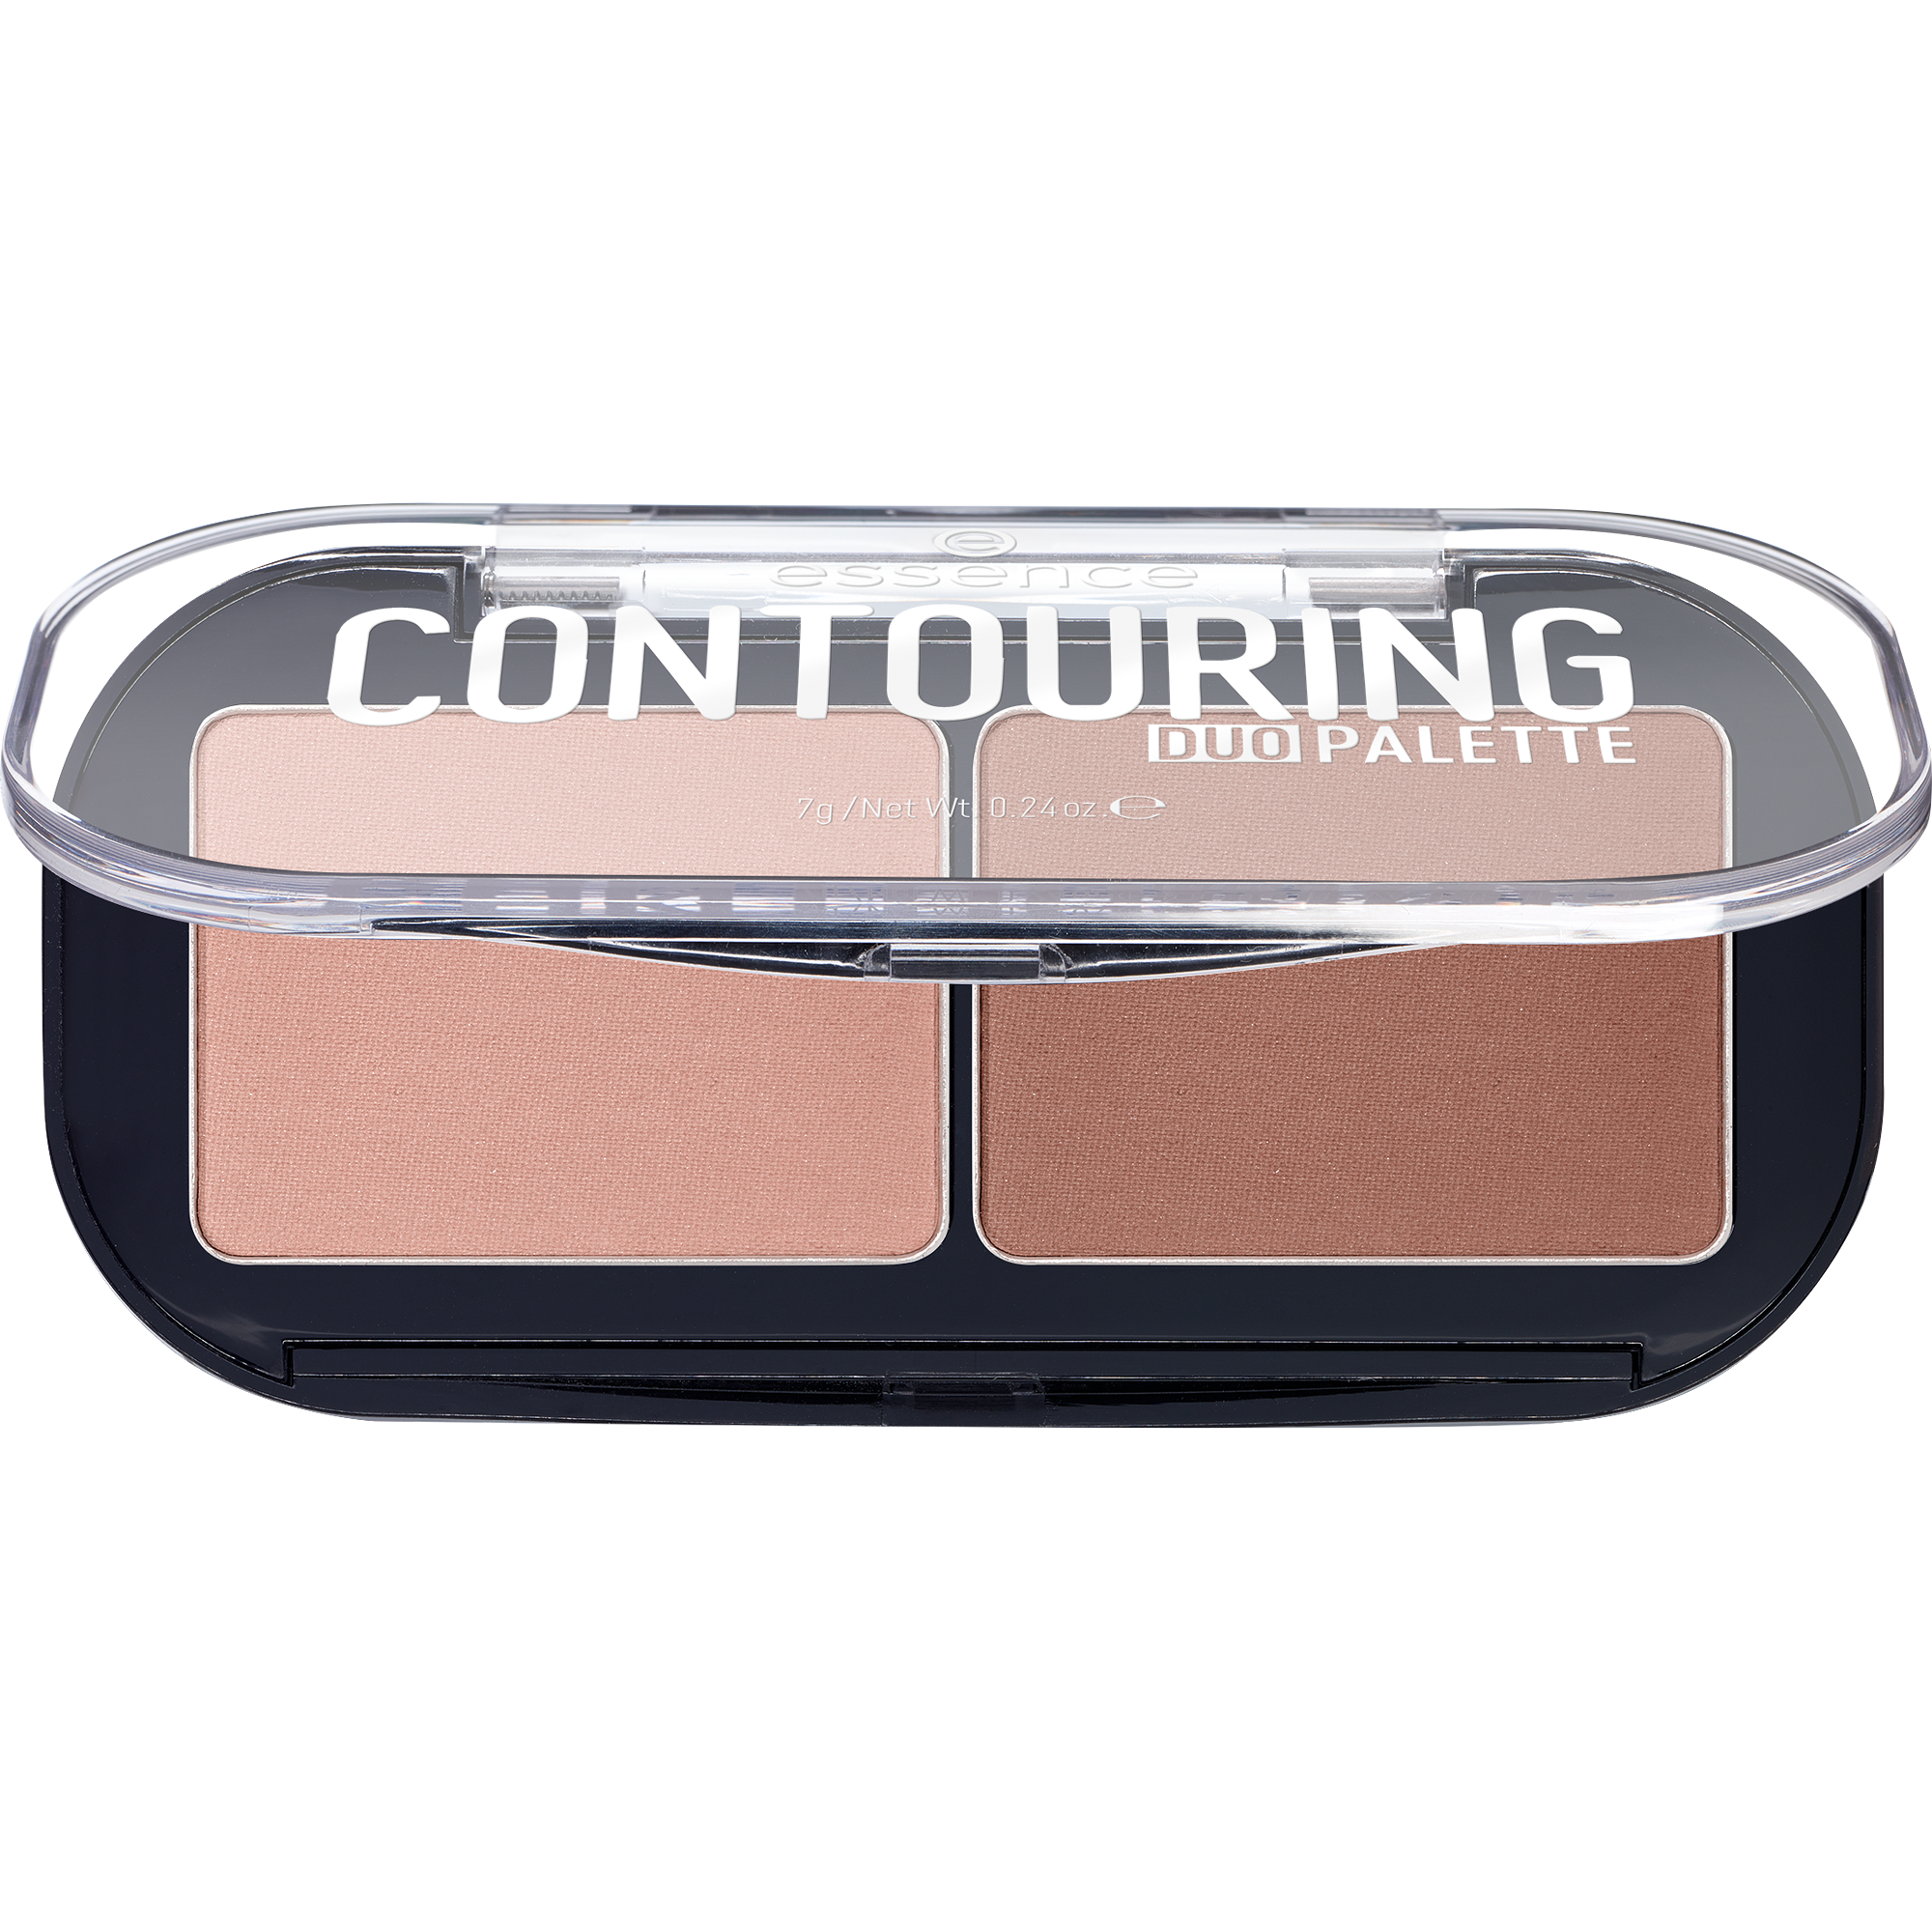 CONTOURING DUO PALETTE